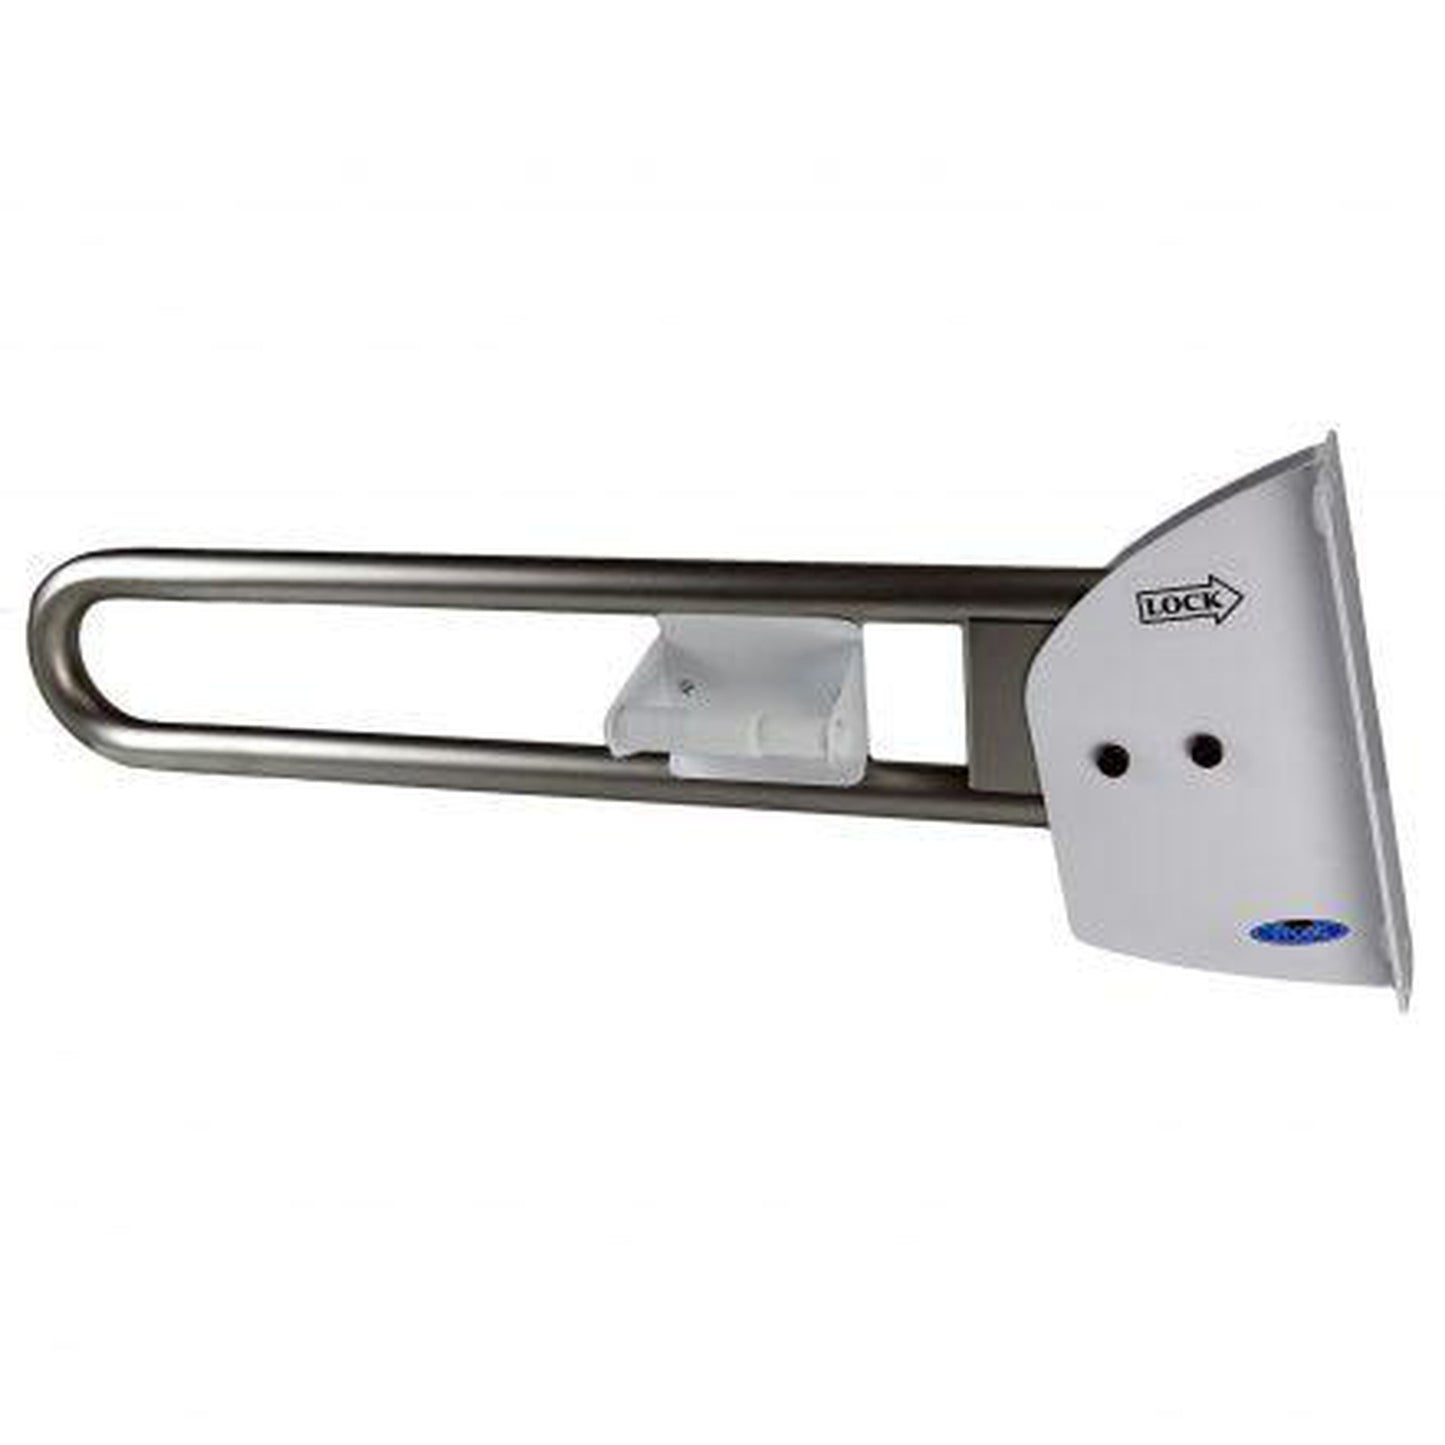 Frost 29.2 x 4.4 x 11 Stainless Steel Grab Bar